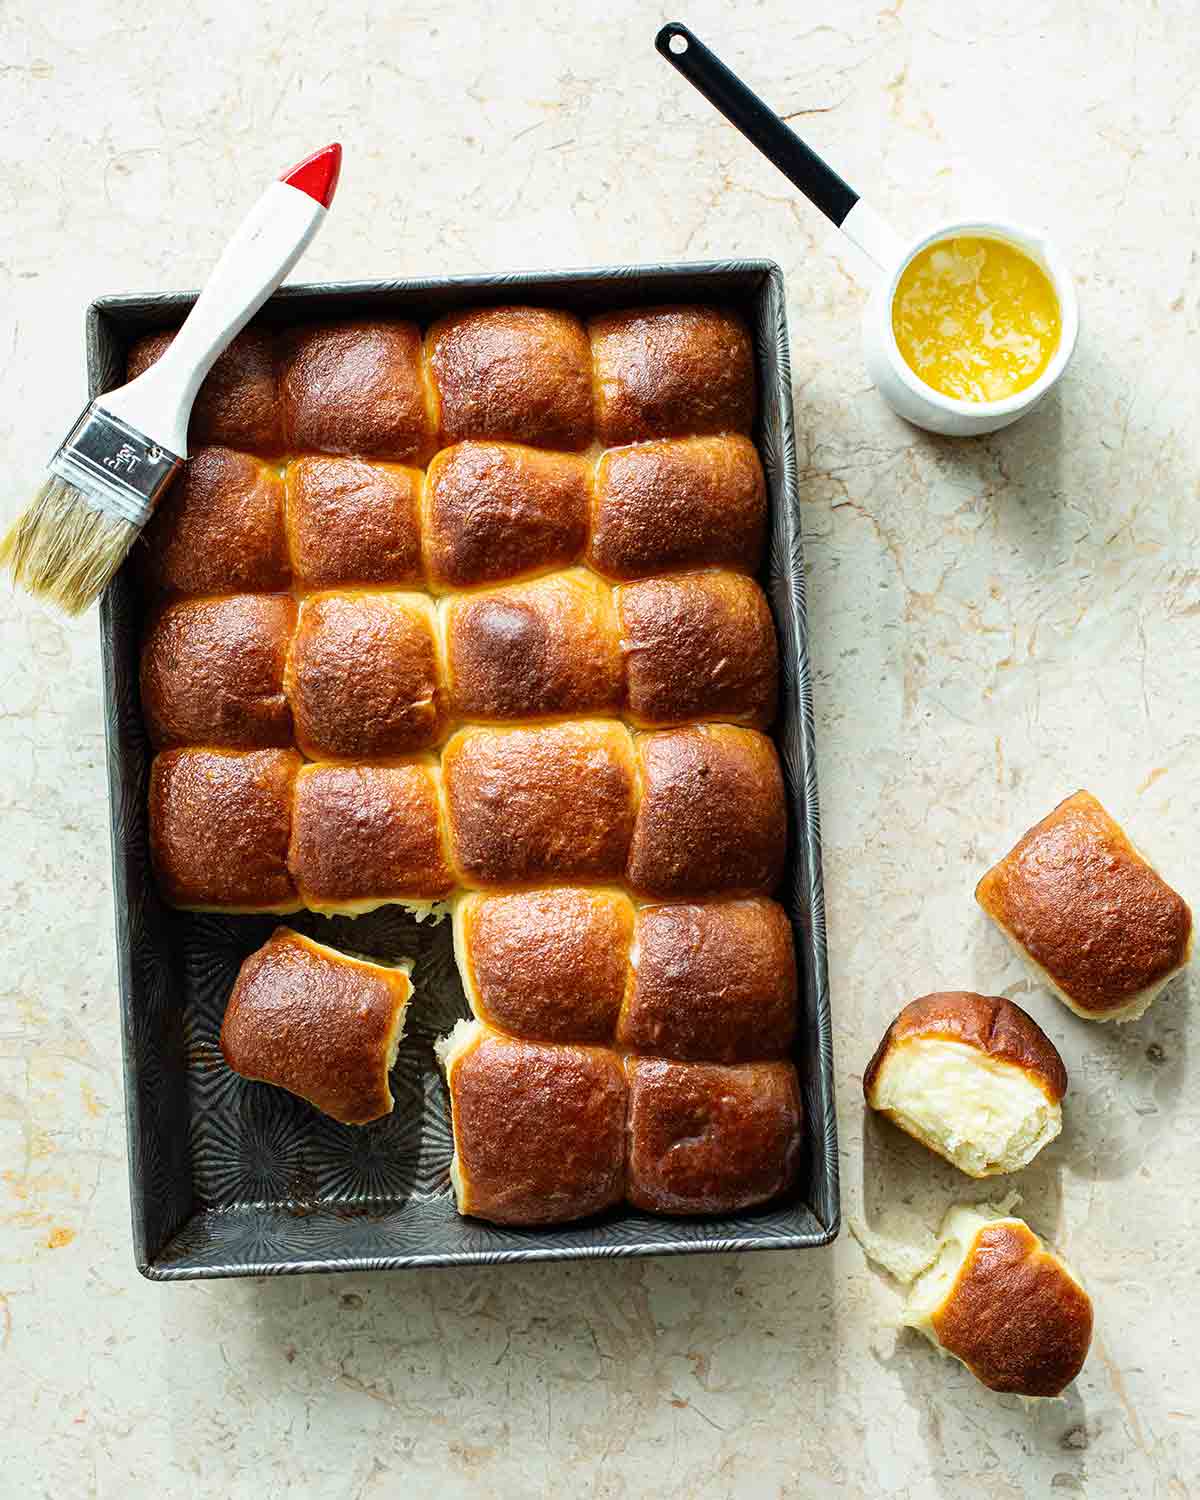 A rectangular pan of Cheryl Day's icebox rolls with a pastry brush resting on the side and a small dish of butter